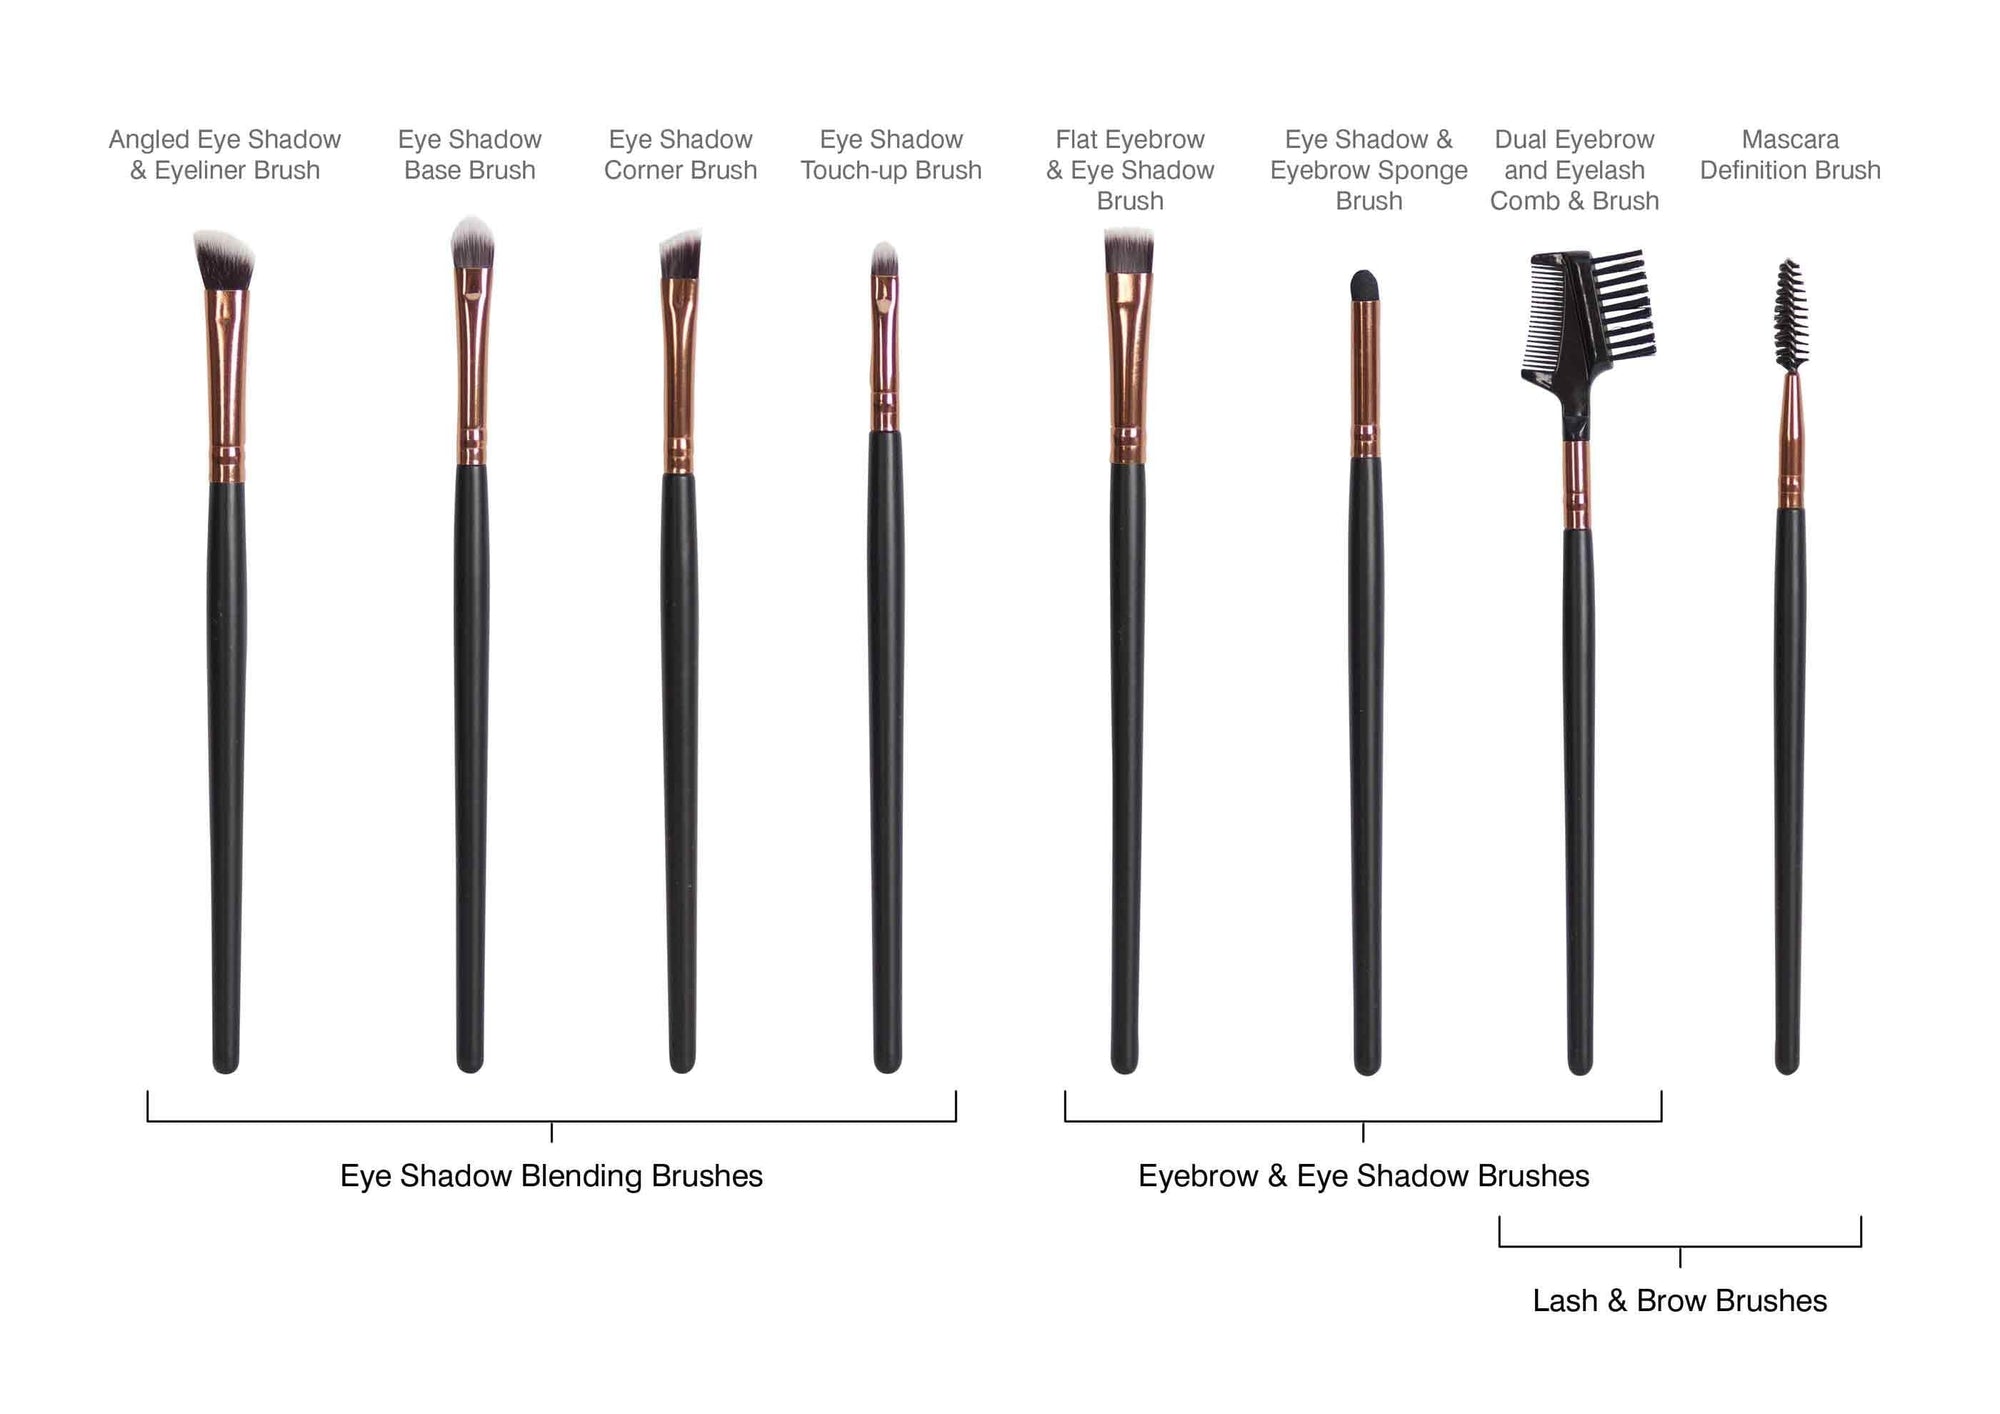 4 eyeshadow blending brushes 2 eyebrow and eyeshadow brushes and 2 lash and brow tools all individually labelled 